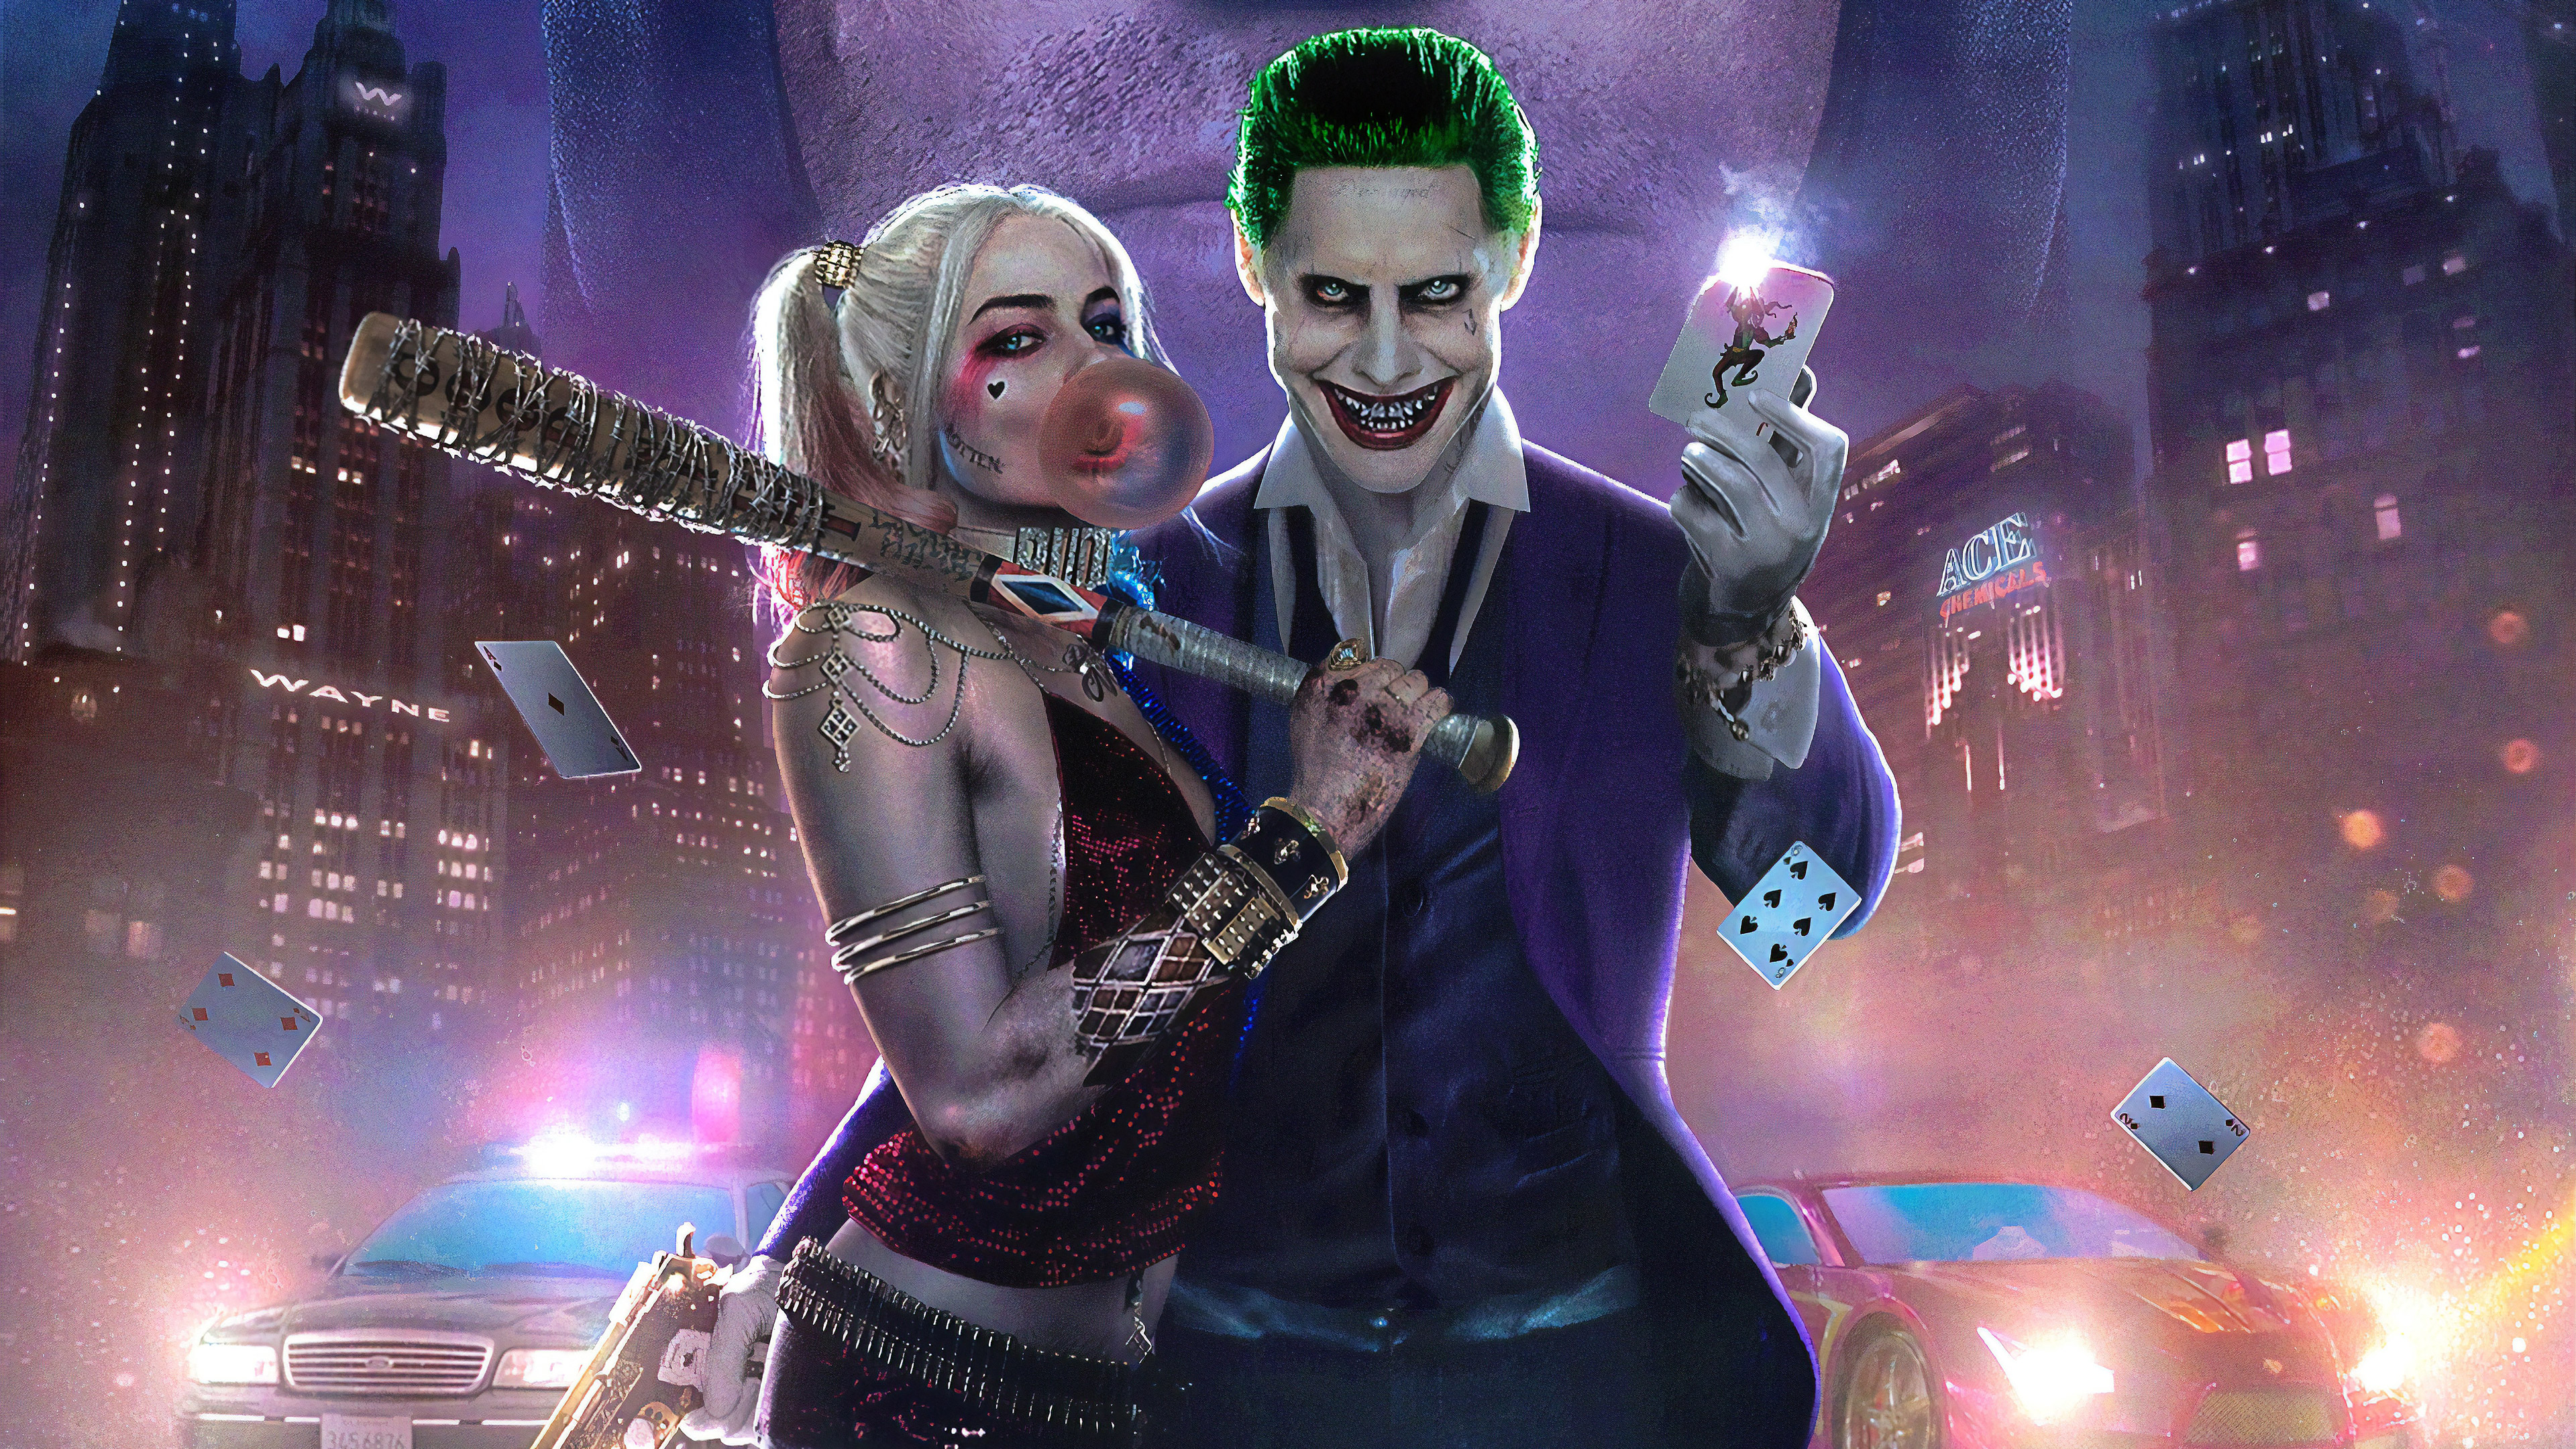 Joker And Harley Quinn Wallpapers posted by Ryan Tremblay.